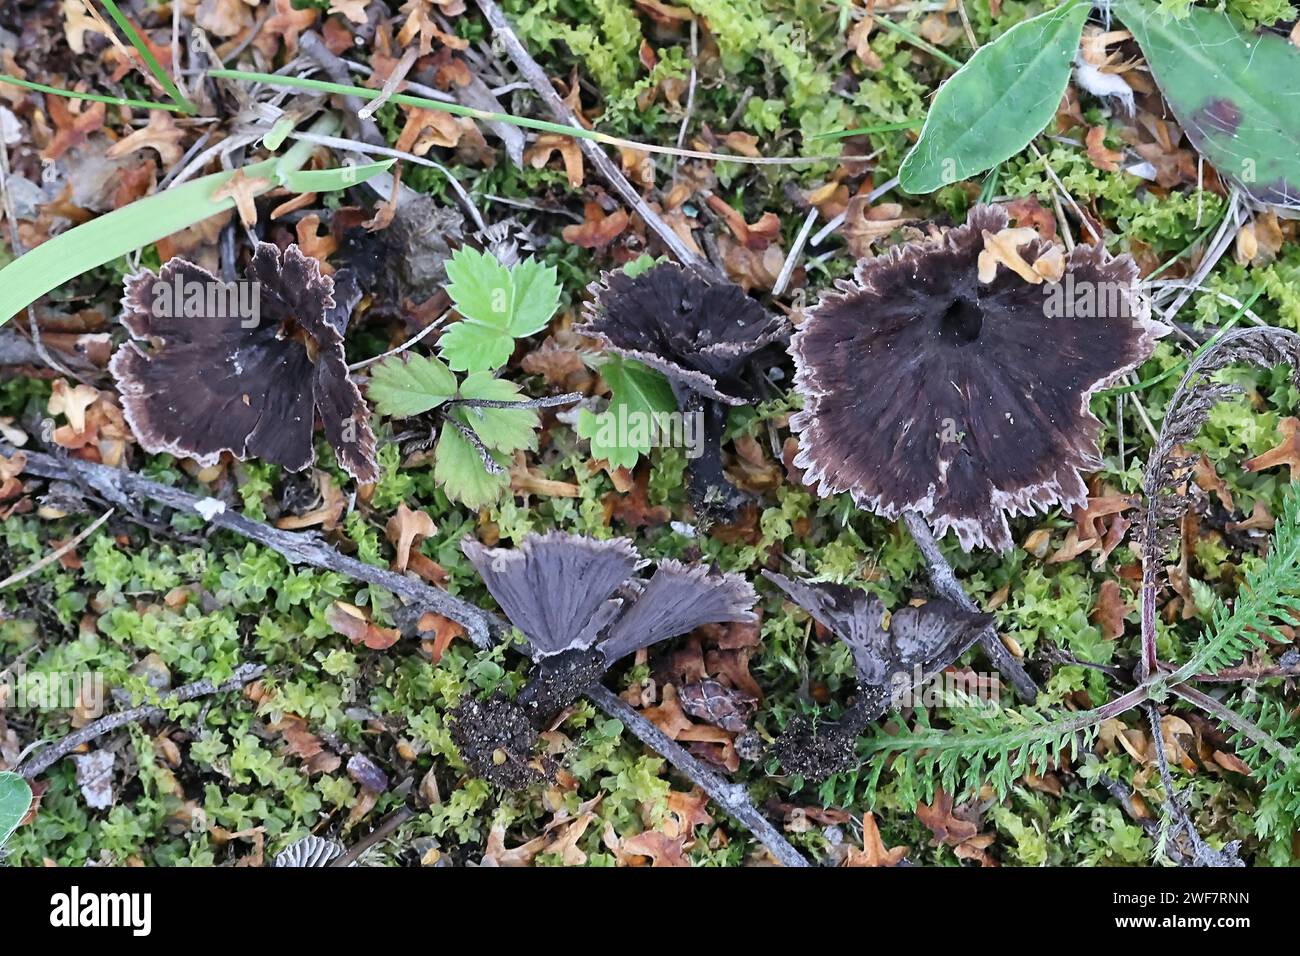 Thelephora caryophyllea, commonly called the Carnation Fungus or Carnation Earthfan, wild fungus from Finland Stock Photo